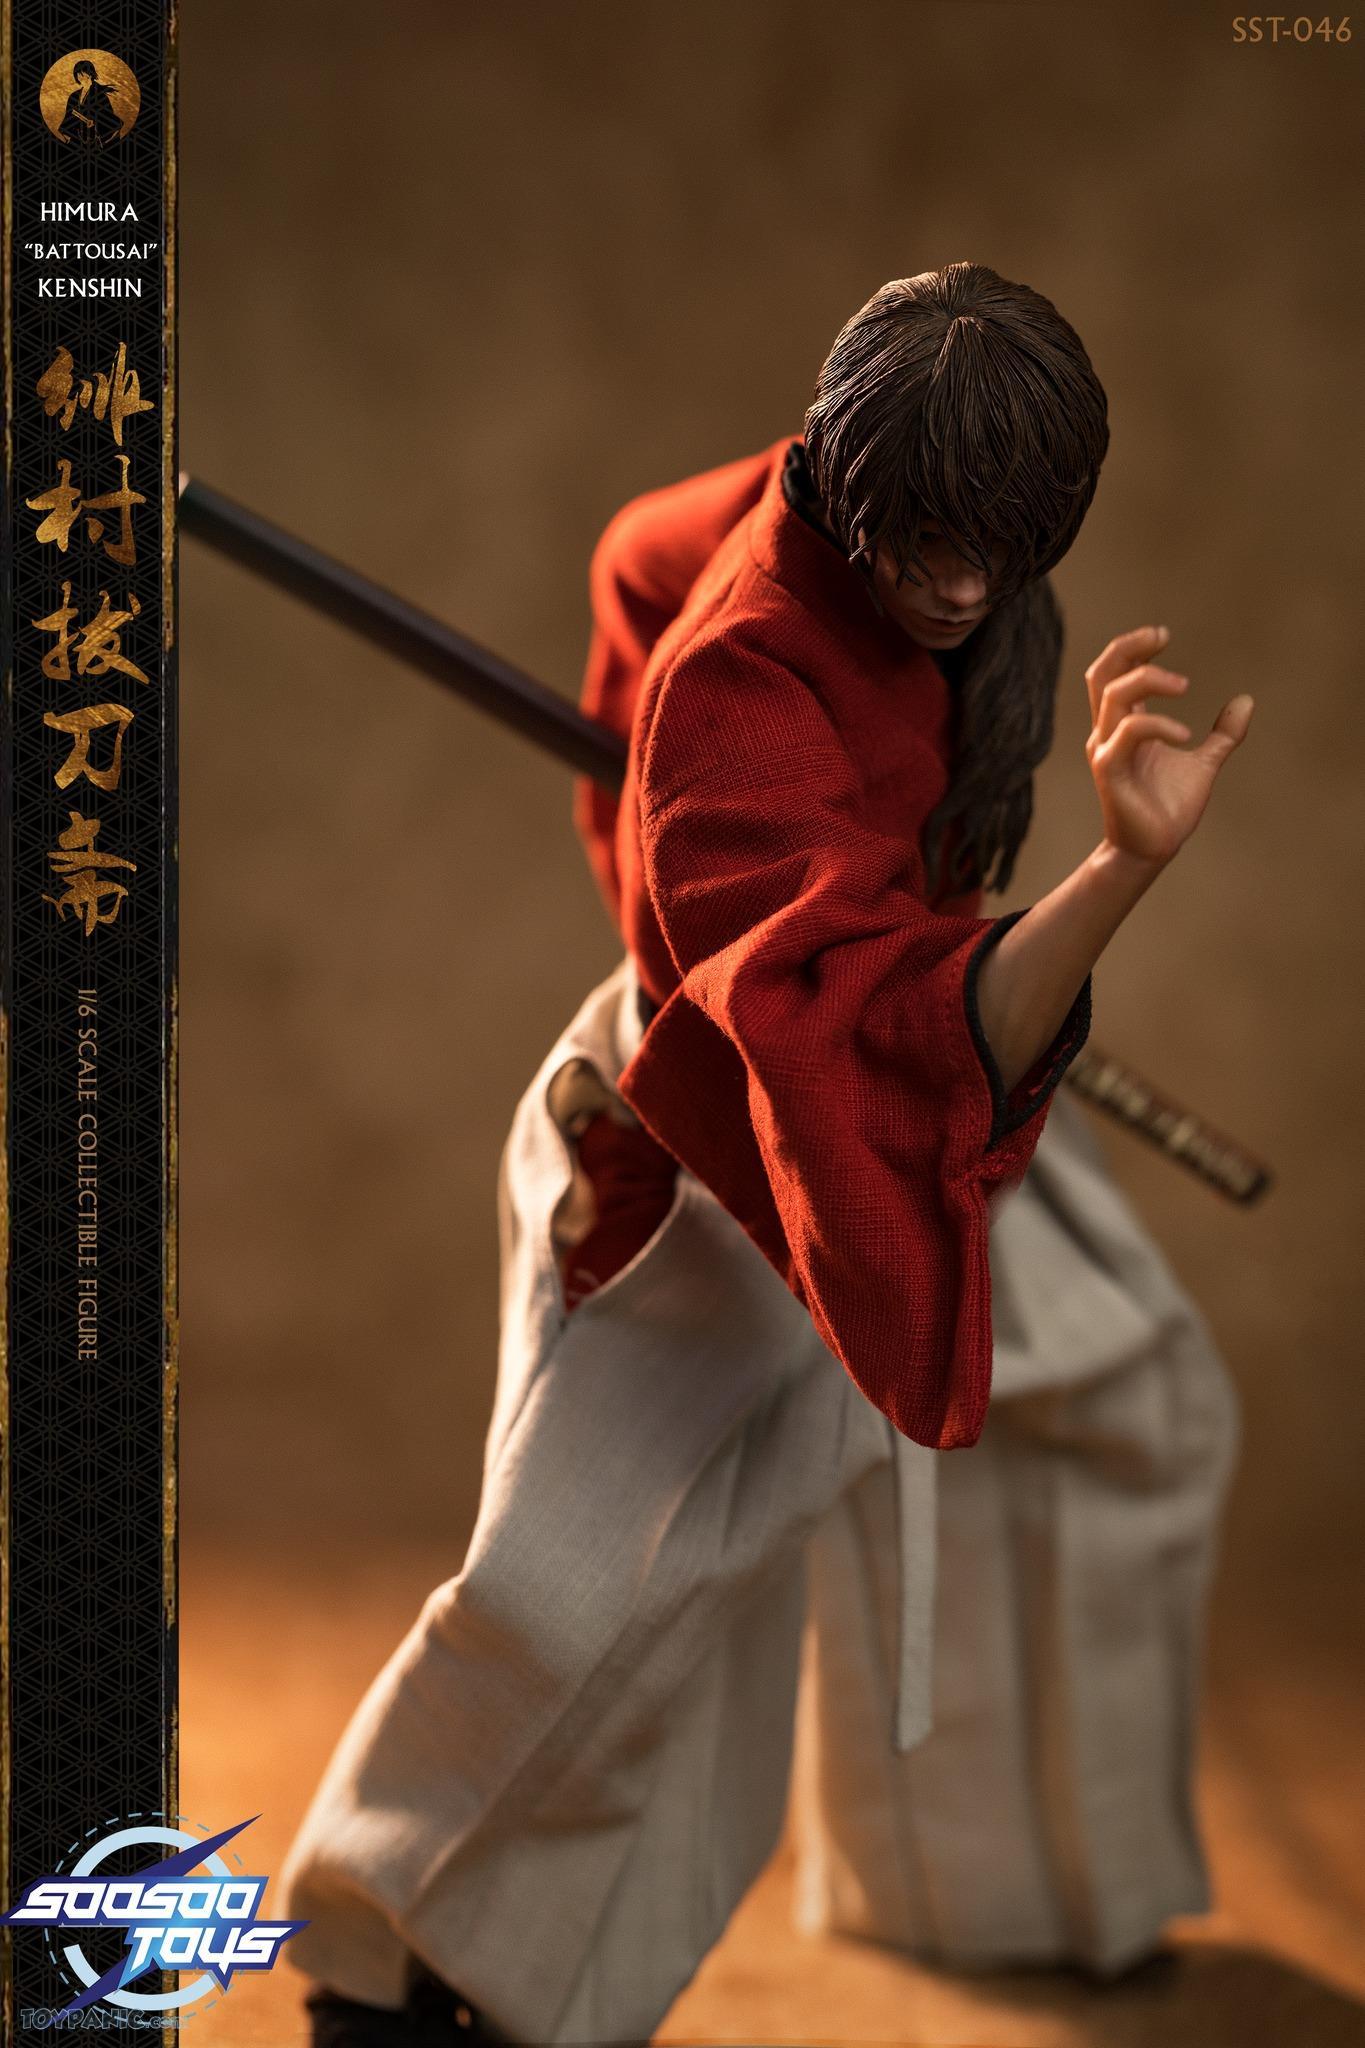 kenshin - NEW PRODUCT: 1/6 scale Rurouni Kenshin Collectible Figure from SooSooToys 712202251233PM_9601394